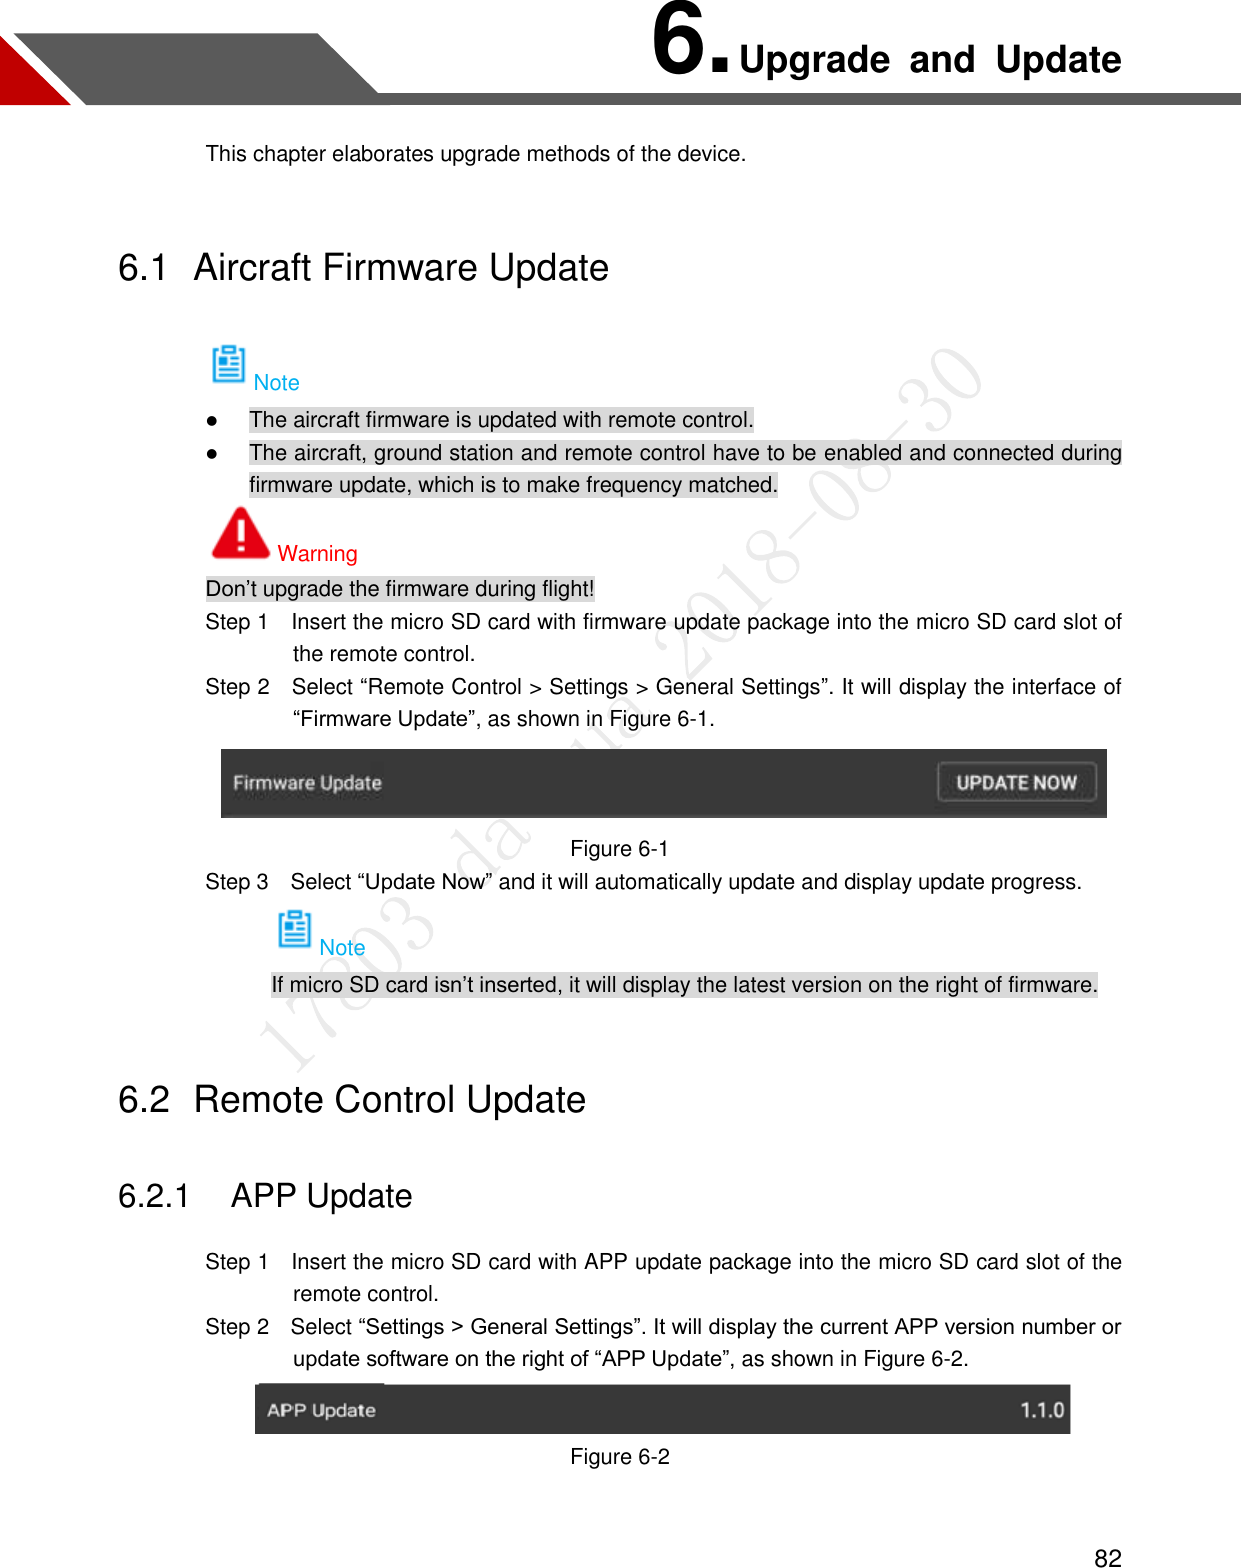  82 6. Upgrade  and  Update This chapter elaborates upgrade methods of the device. 6.1  Aircraft Firmware Update Note  The aircraft firmware is updated with remote control.  The aircraft, ground station and remote control have to be enabled and connected during firmware update, which is to make frequency matched. Warning Don’t upgrade the firmware during flight!                 Step 1    Insert the micro SD card with firmware update package into the micro SD card slot of the remote control.               Step 2  Select “Remote Control &gt; Settings &gt; General Settings”. It will display the interface of “Firmware Update”, as shown in Figure 6-1.  Figure 6-1                 Step 3    Select “Update Now” and it will automatically update and display update progress. Note If micro SD card isn’t inserted, it will display the latest version on the right of firmware. 6.2  Remote Control Update 6.2.1 APP Update                 Step 1    Insert the micro SD card with APP update package into the micro SD card slot of the remote control.                 Step 2    Select “Settings &gt; General Settings”. It will display the current APP version number or update software on the right of “APP Update”, as shown in Figure 6-2.  Figure 6-2  